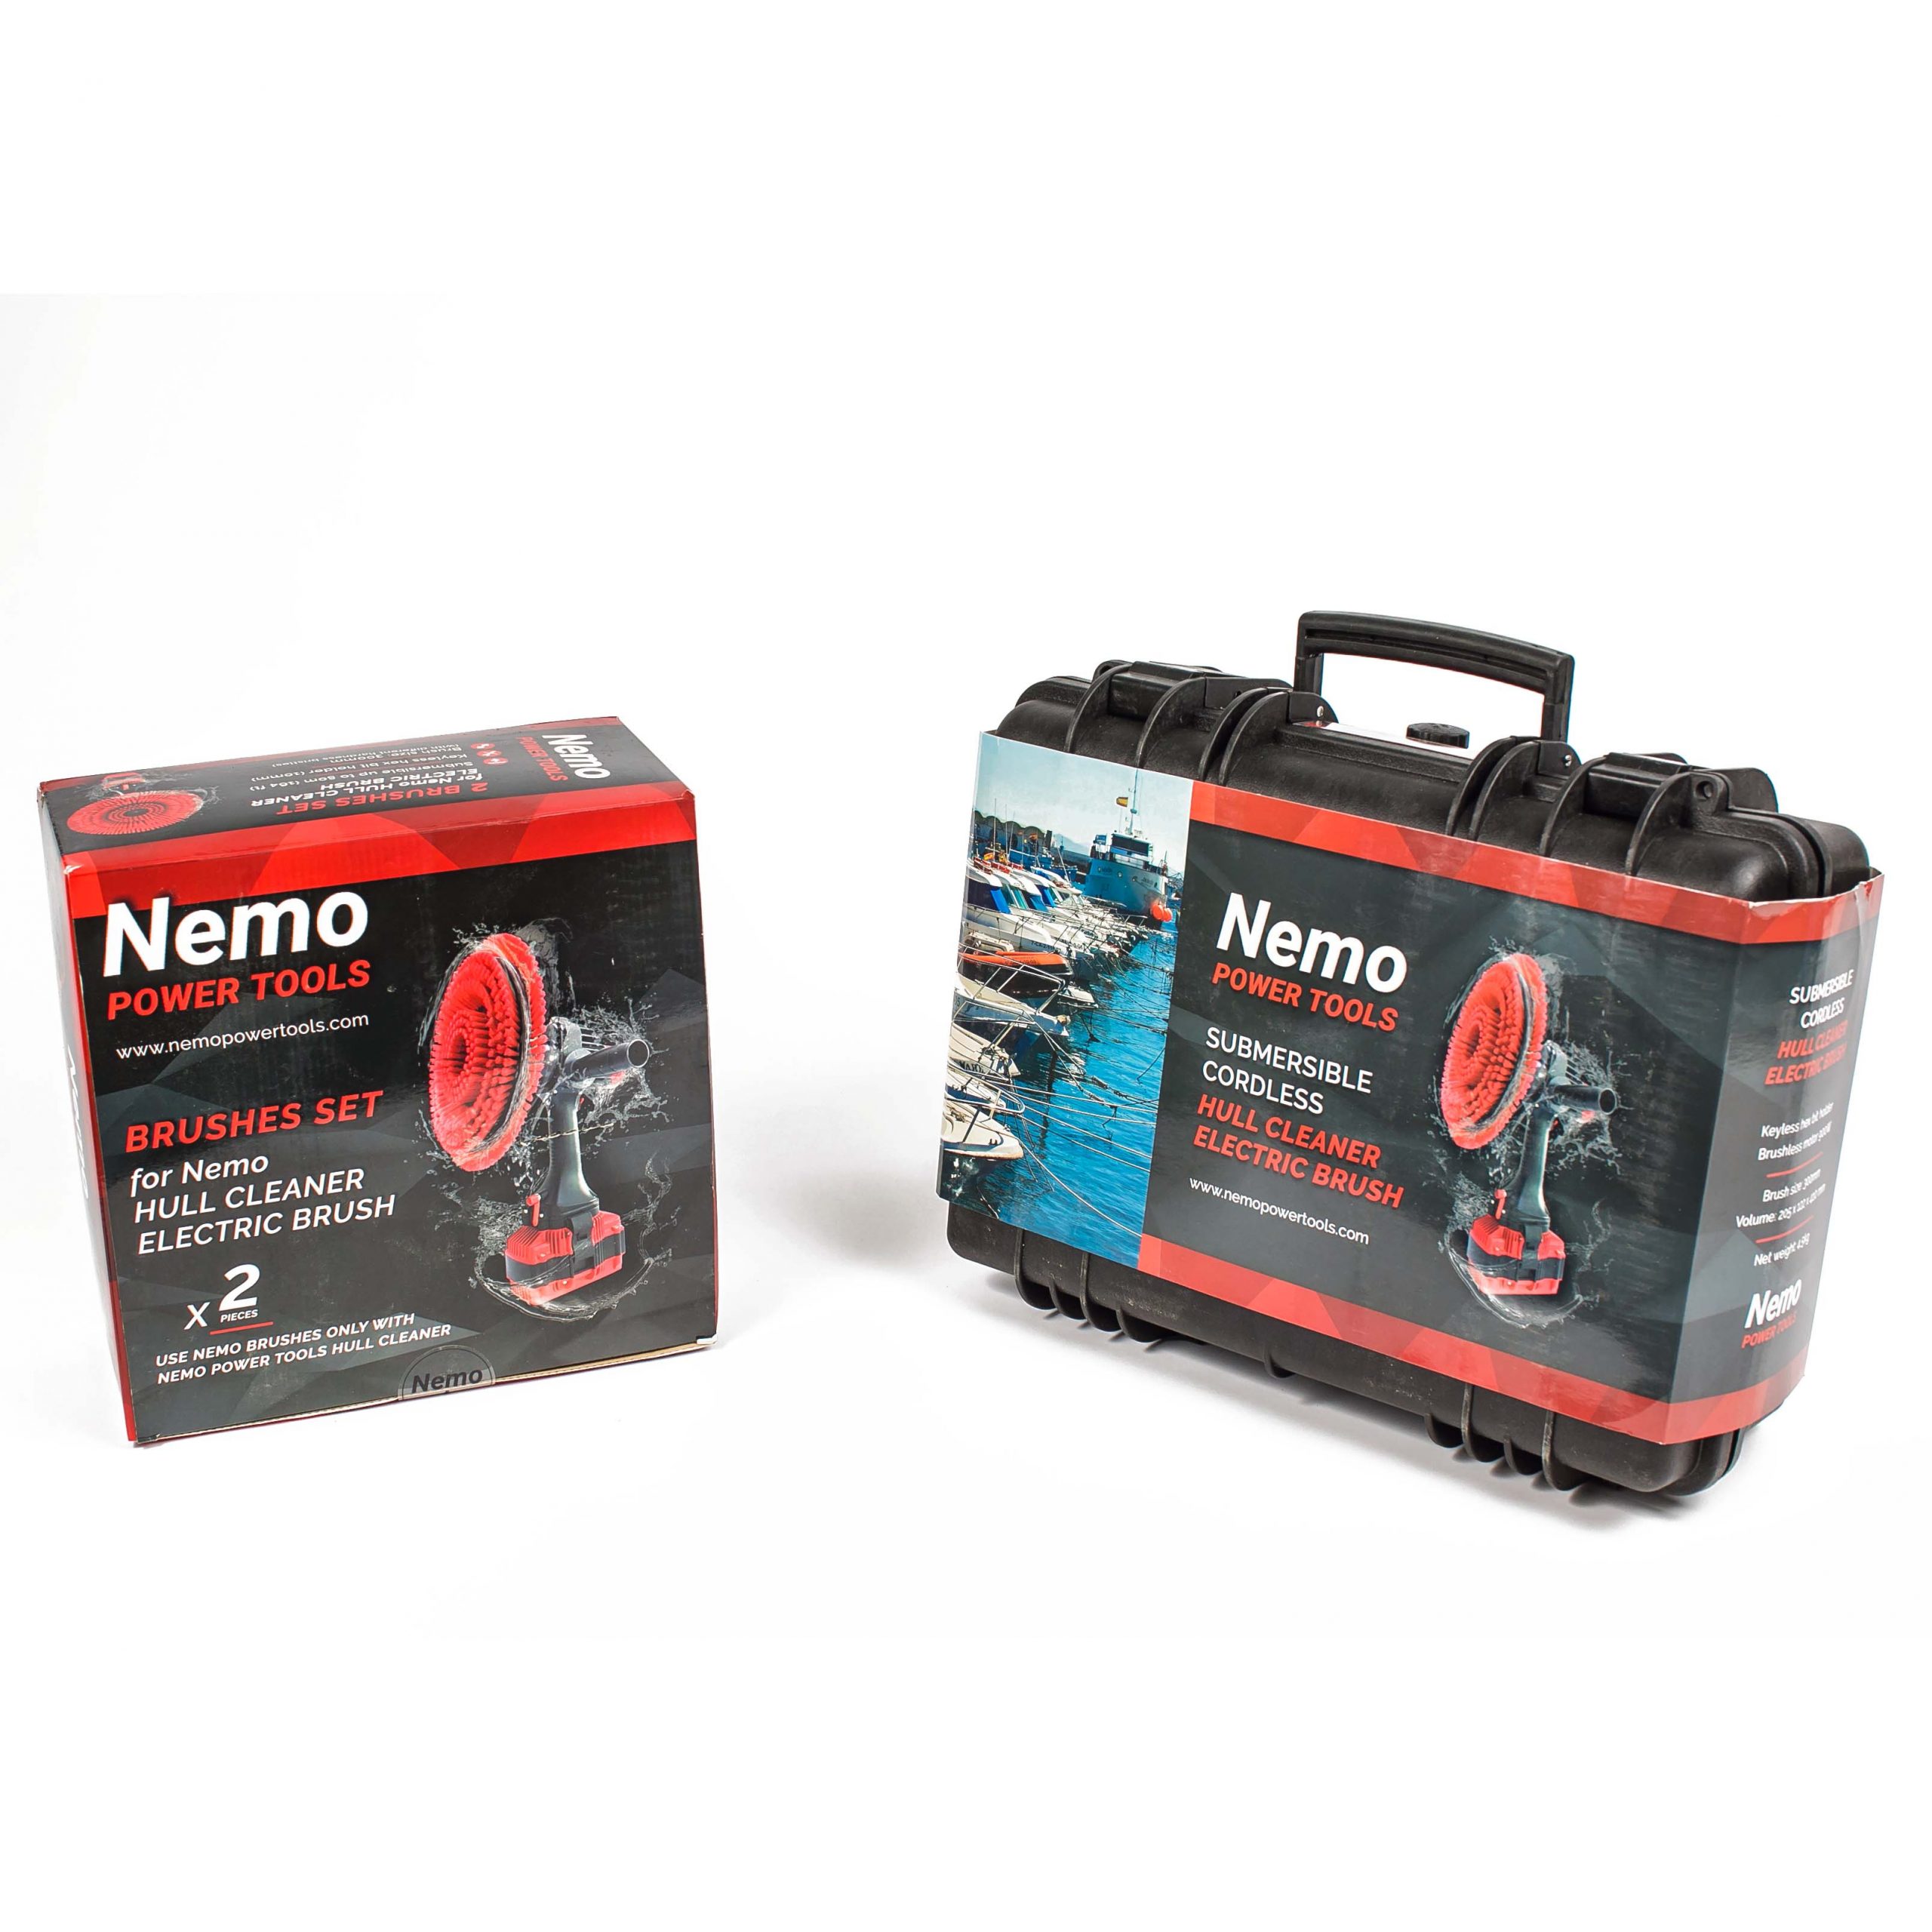 Submersible Drill Brush Set (includes all 4 Brushes) - Nemo Power Tools